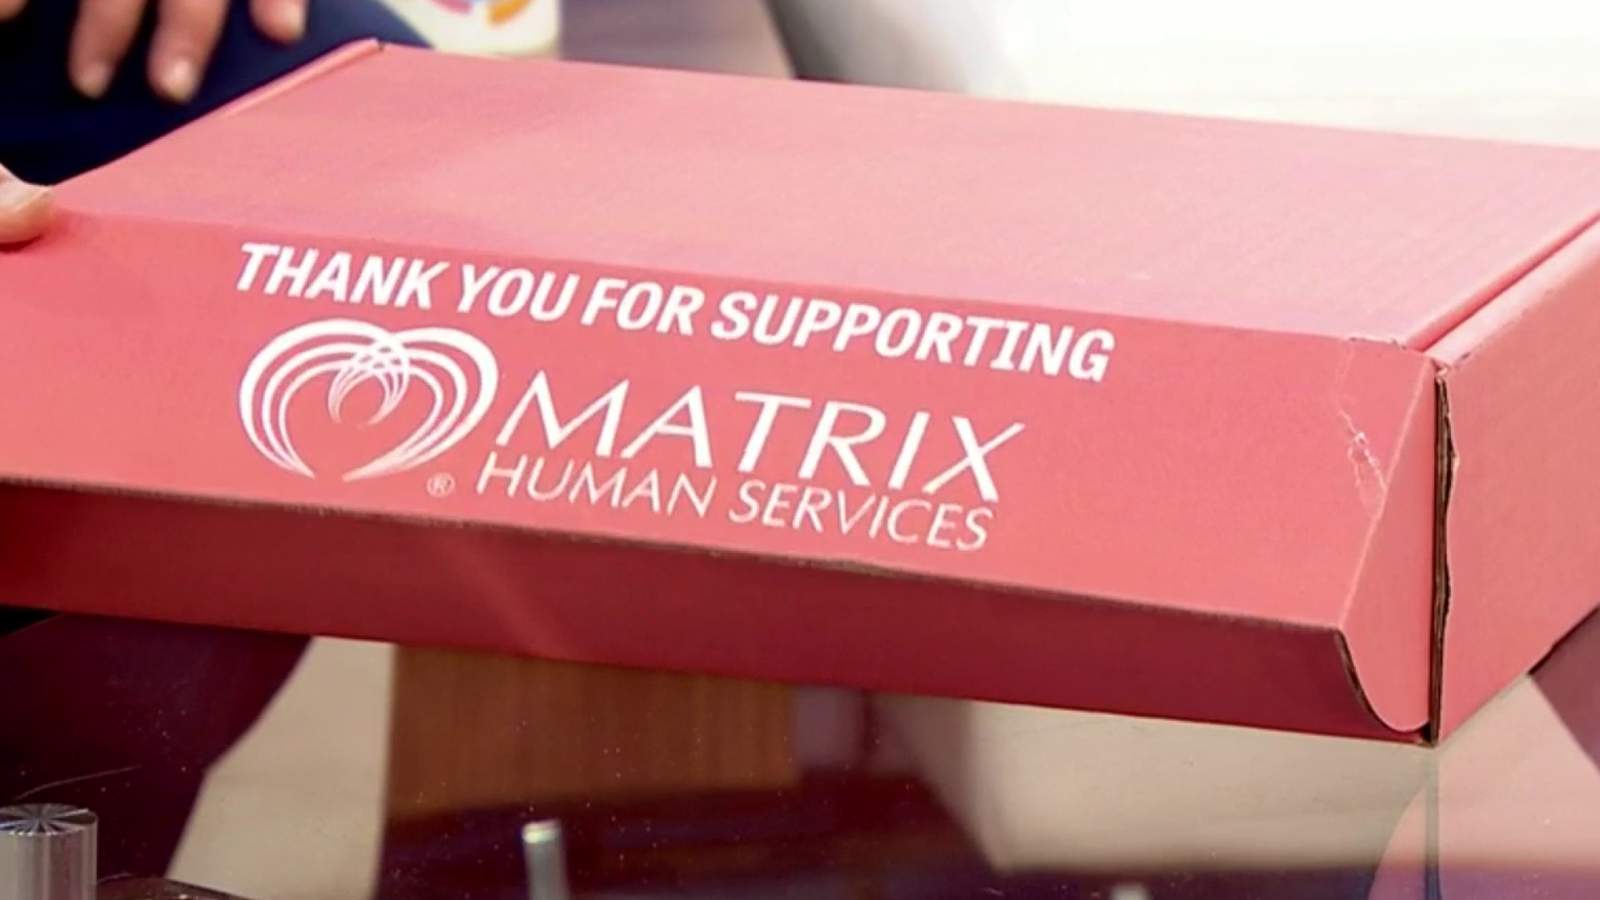 The party box that gives back